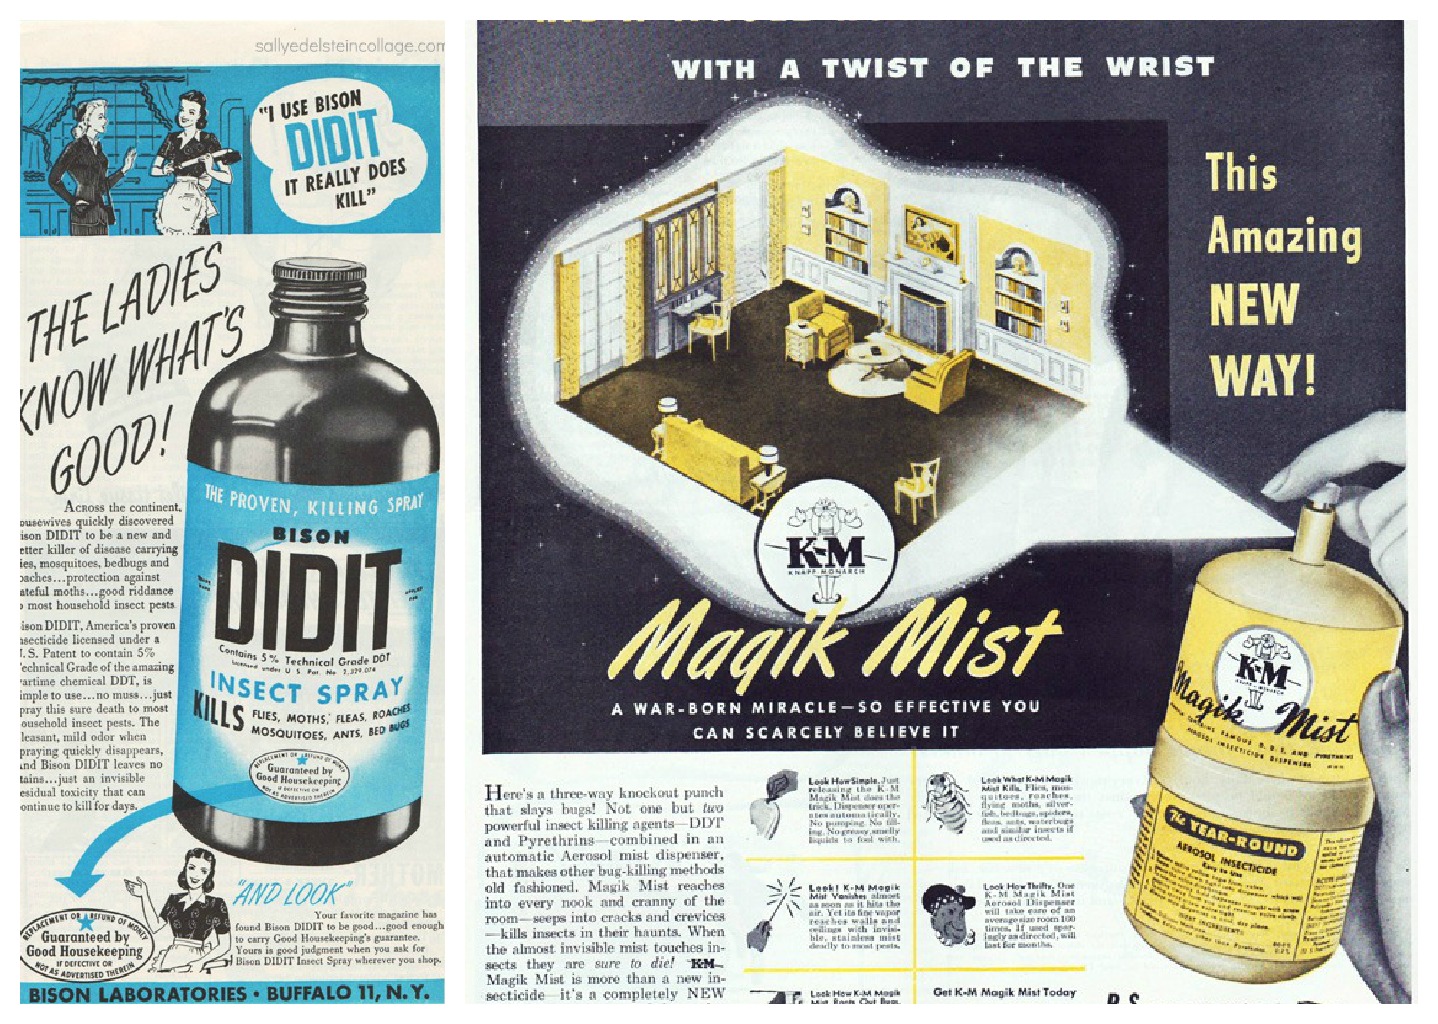 ddt insecticide